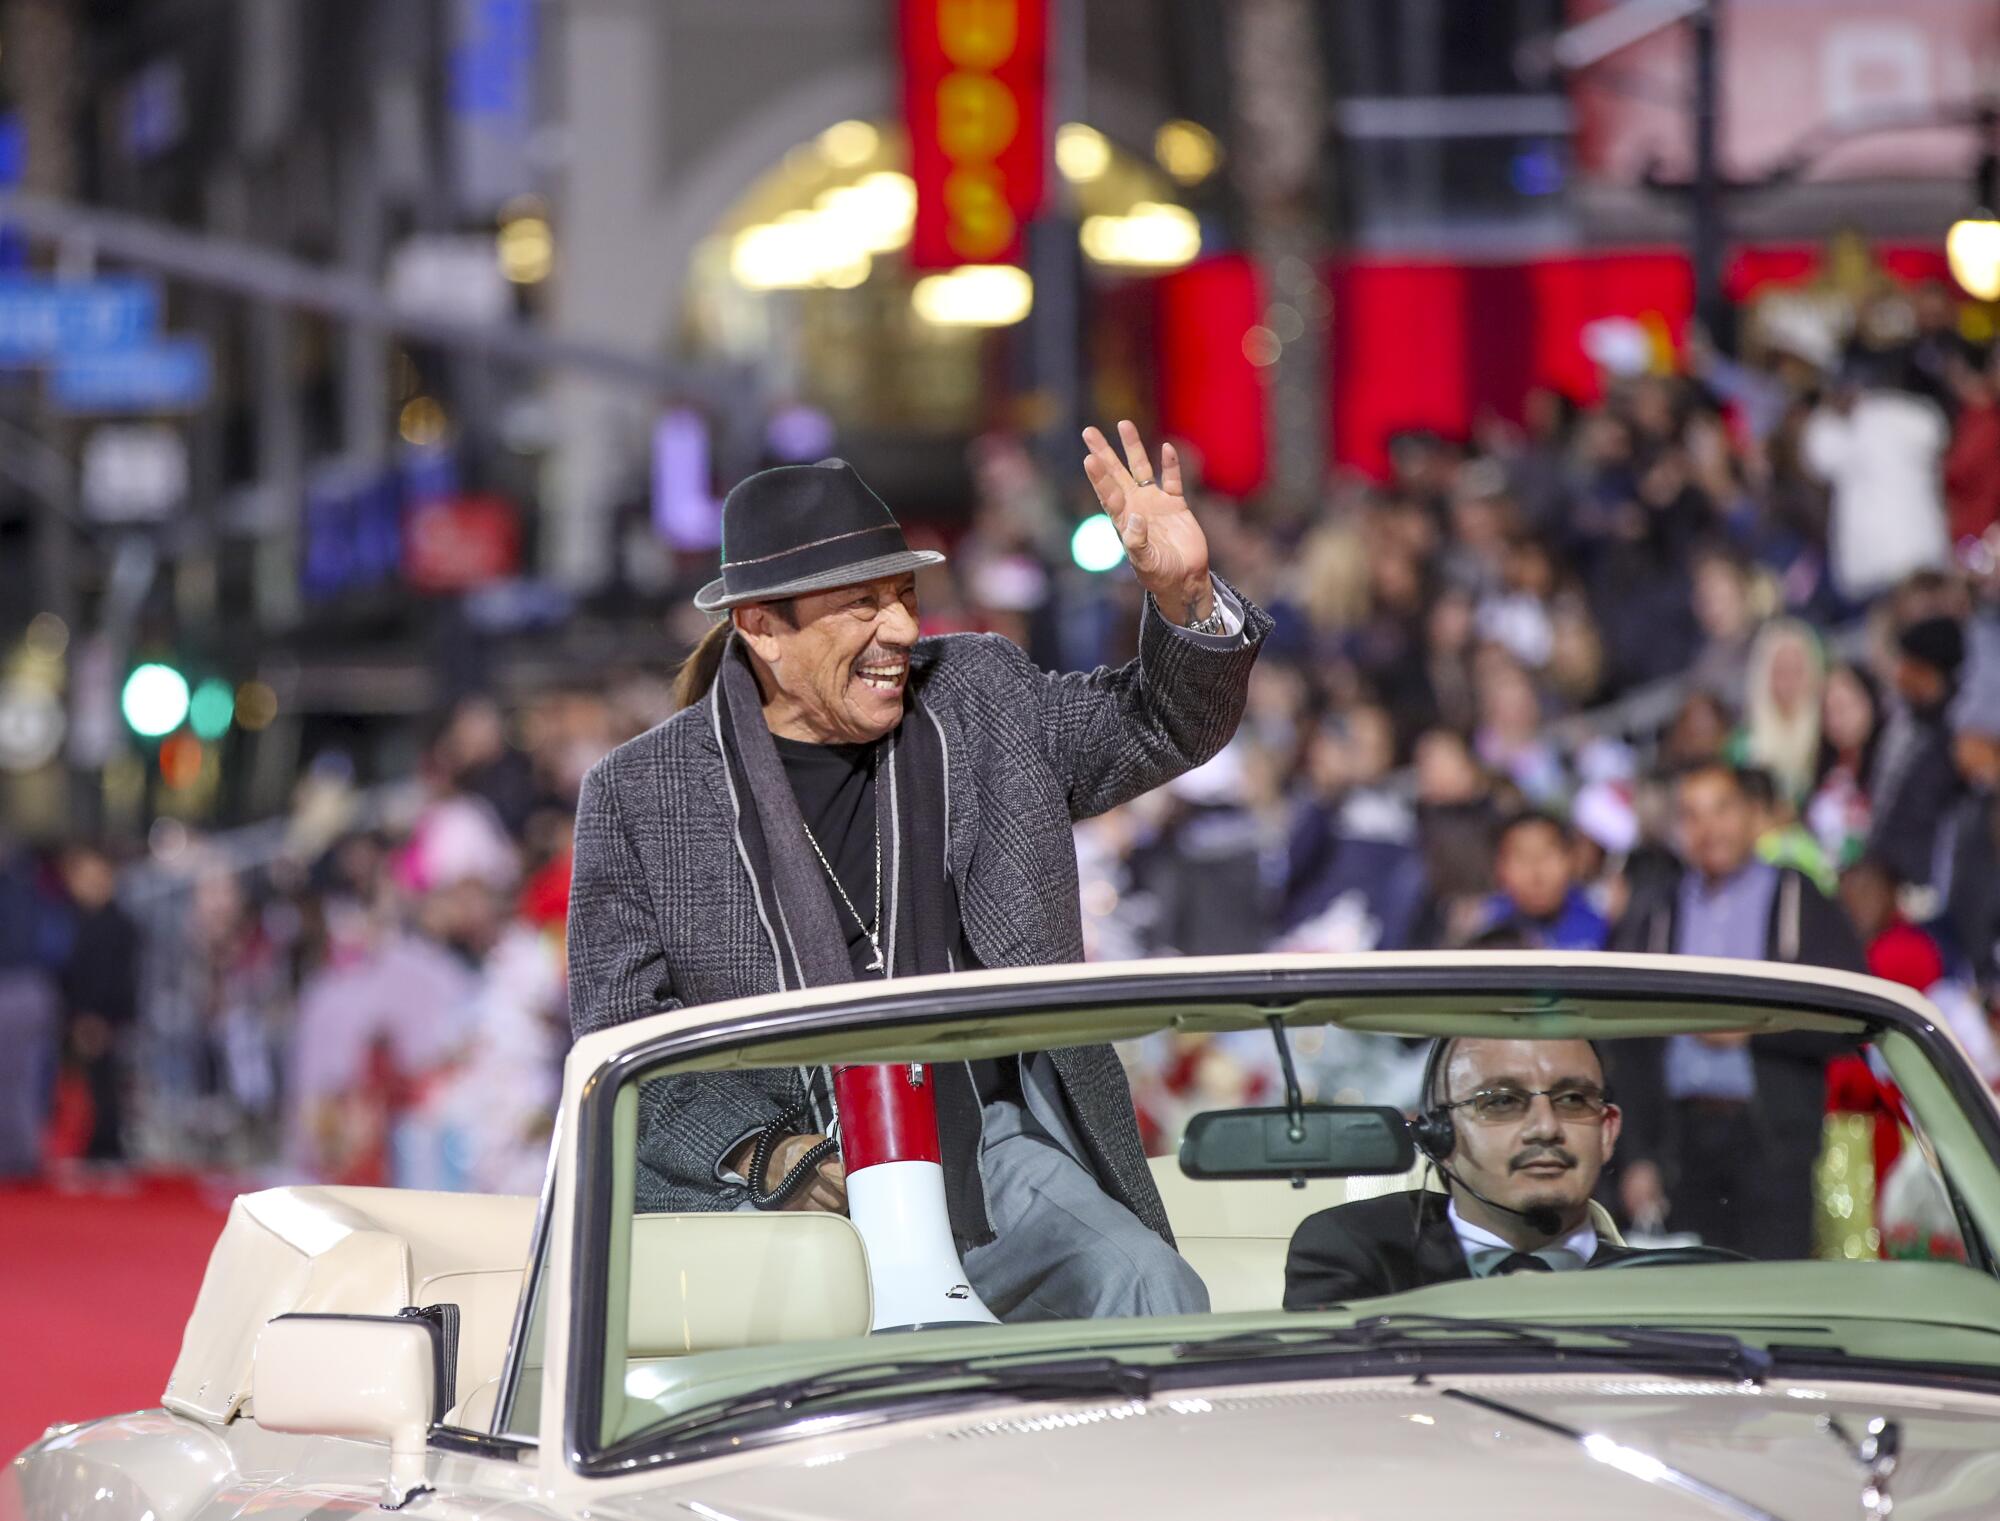 Actor Danny Trejo waves while sitting high on the backseat of a car while people watch in the background.